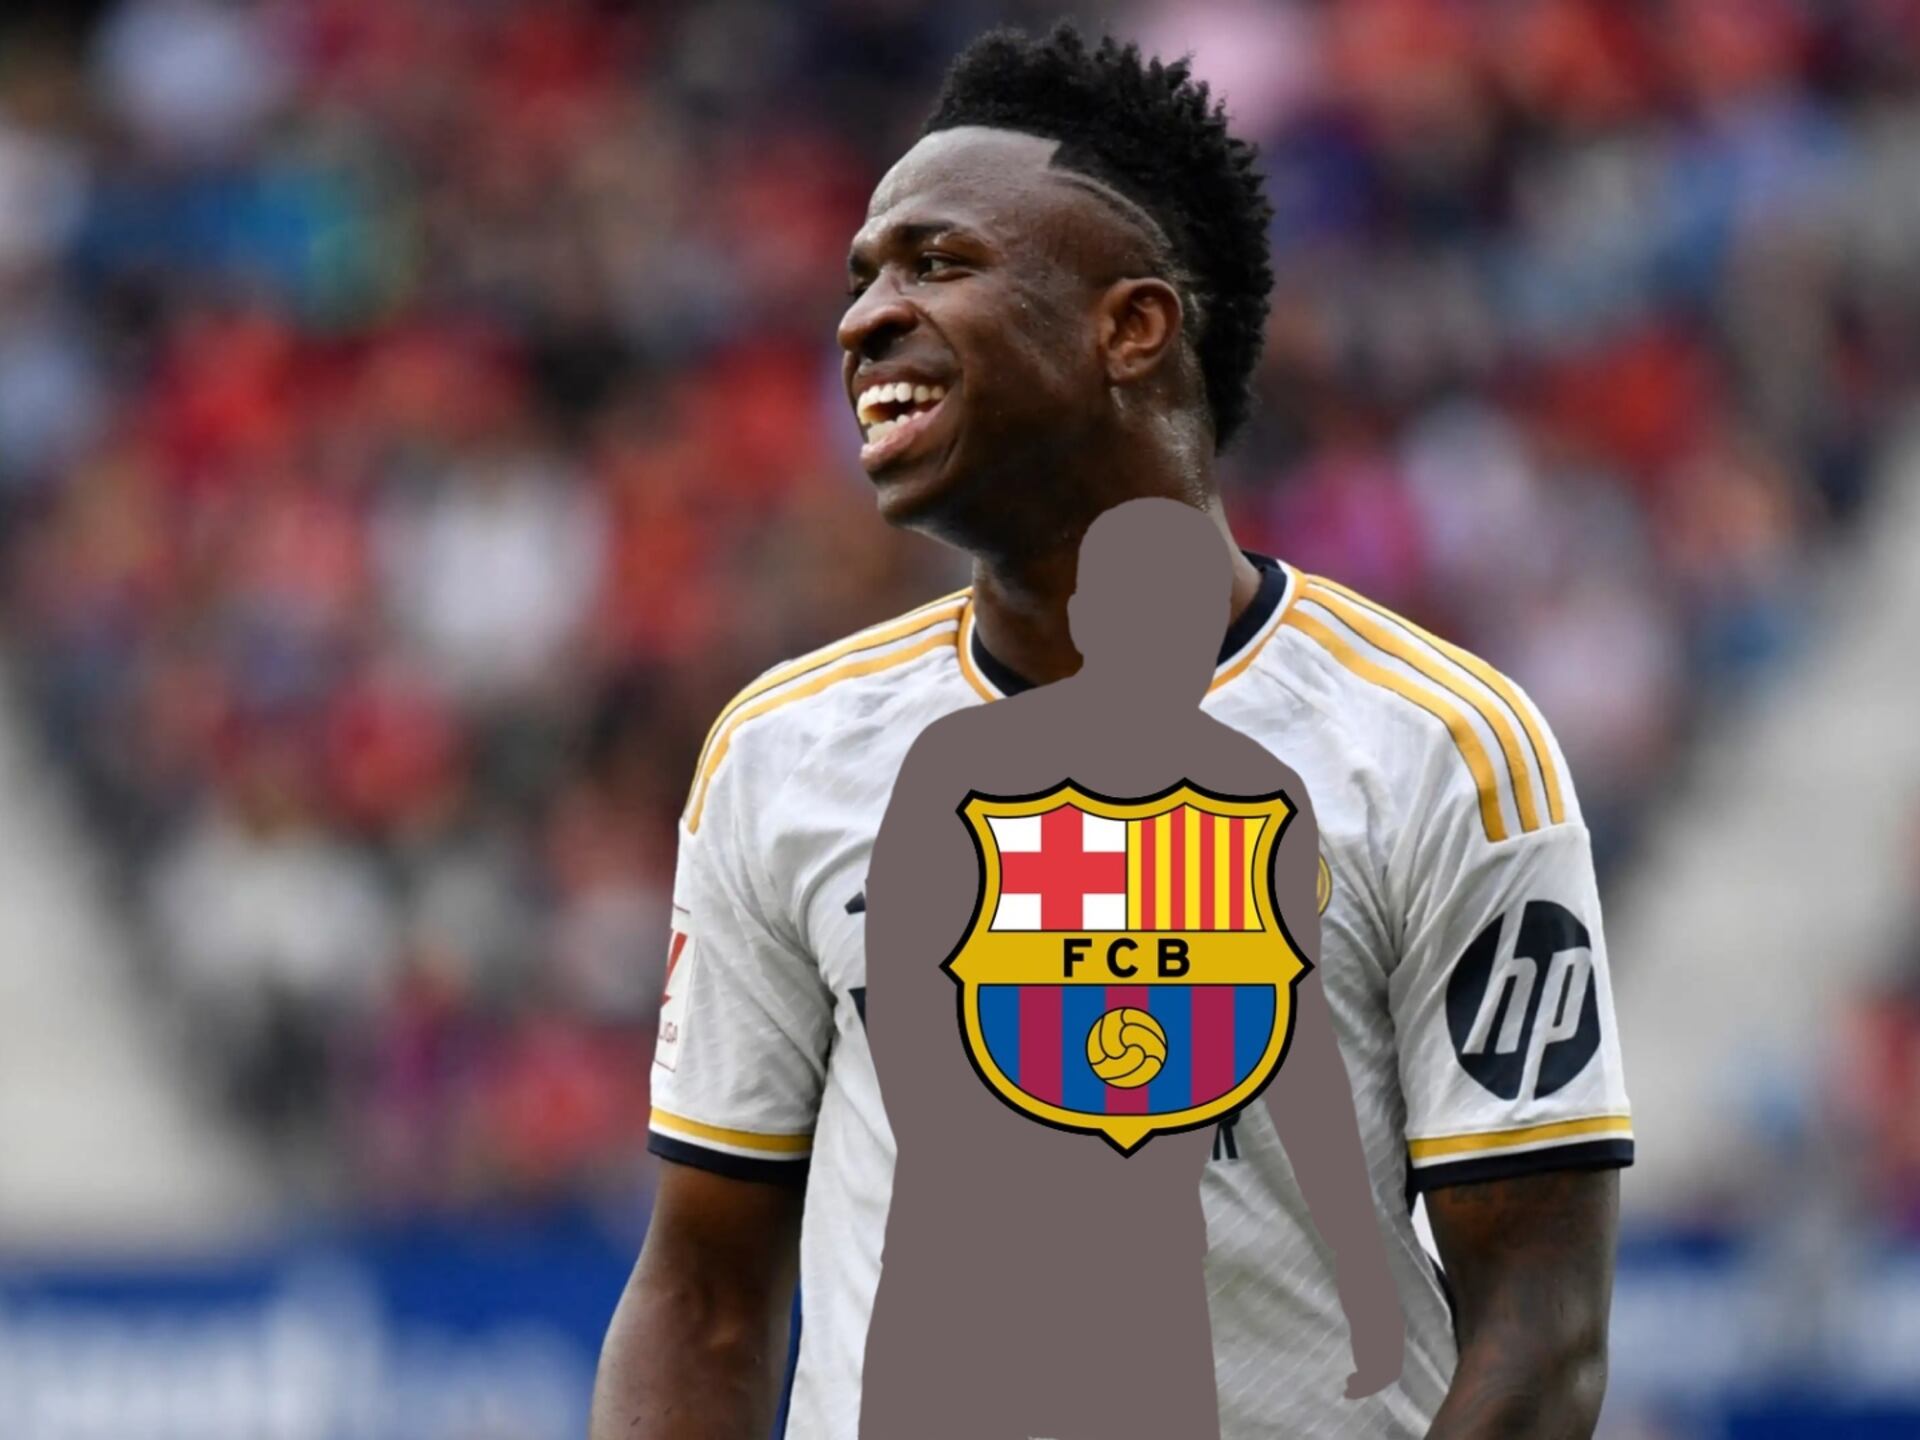 He was compared to Vinicius and he would leave through the back door, Barcelona's player who will be loaned out 